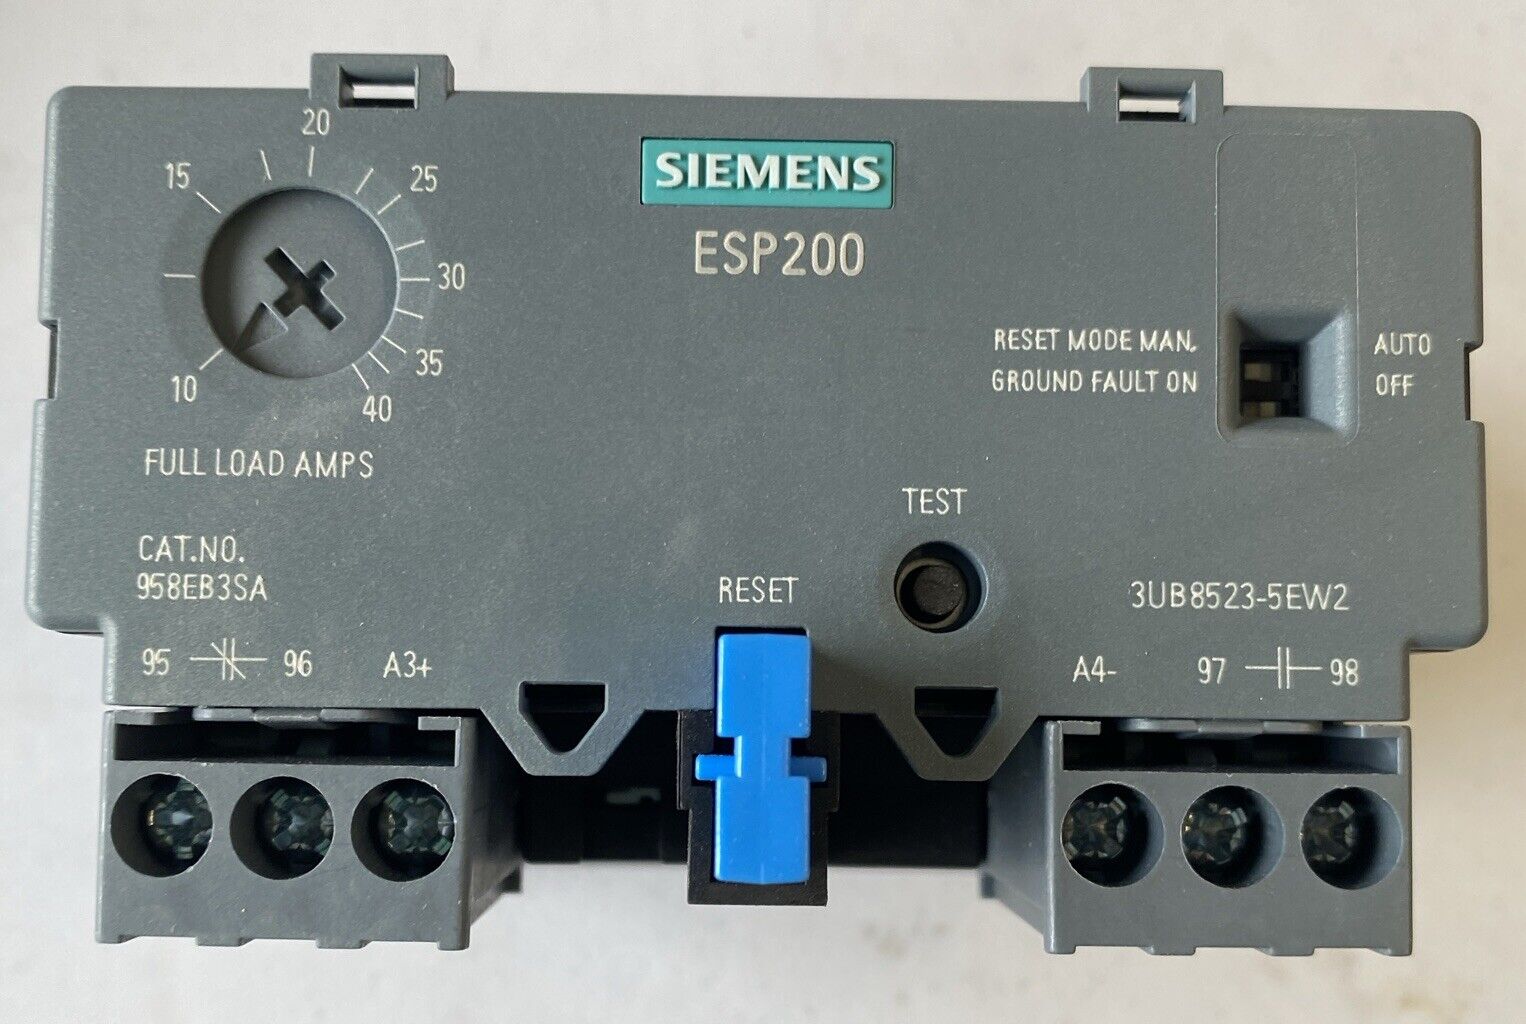 New Siemens ESP200 958EB3SA Solid State Overload Relay. Made in Czech Rep.